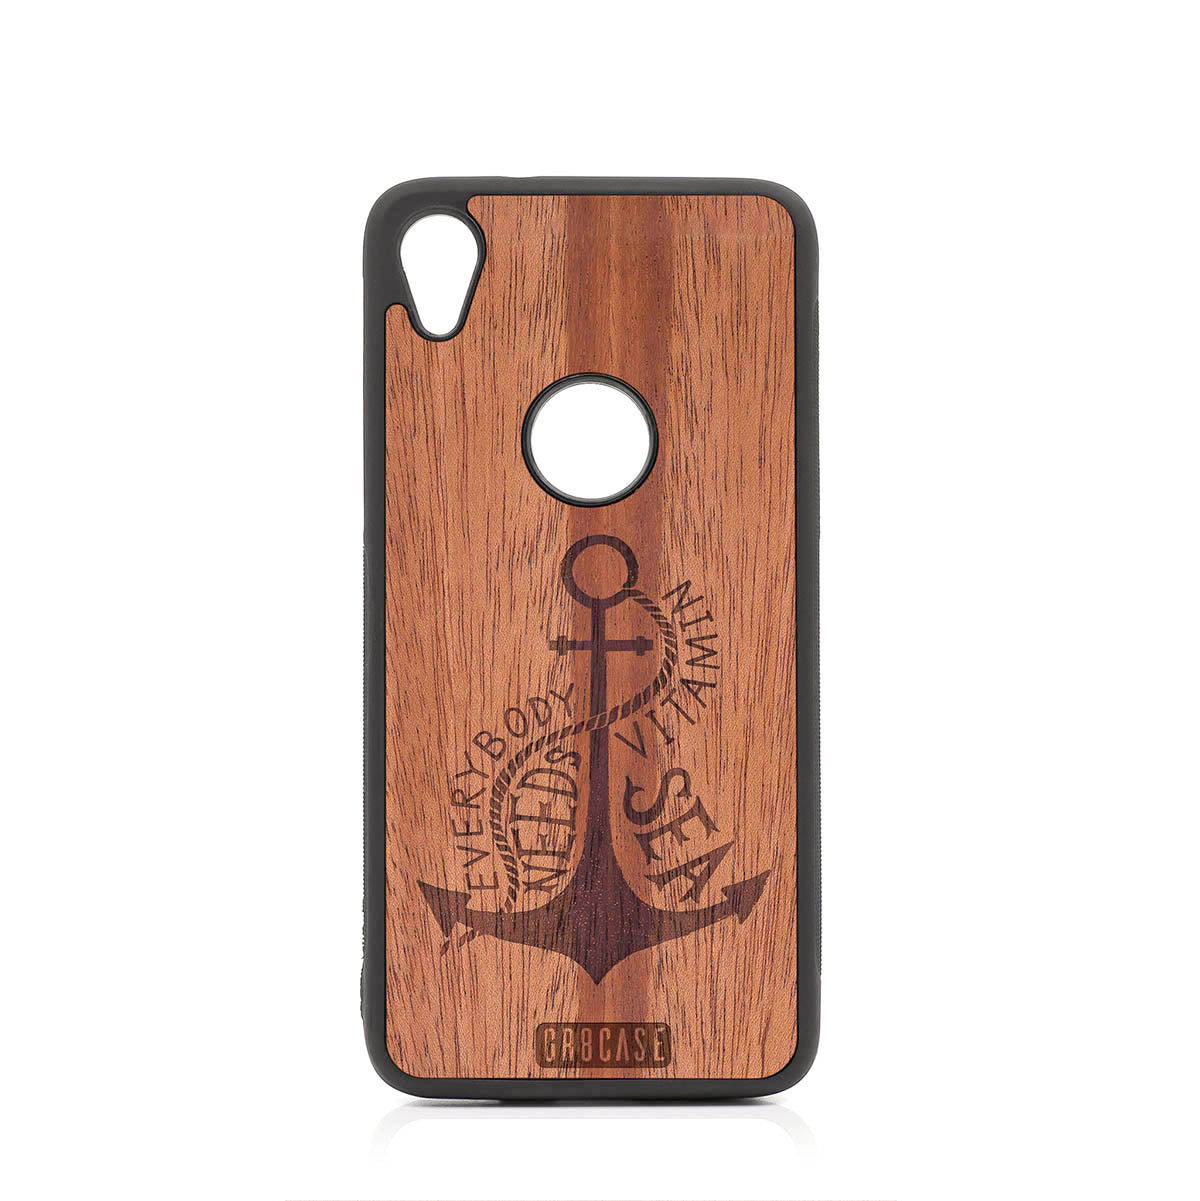 Everybody Needs Vitamin Sea (Anchor) Design Wood Case For Moto E6 by GR8CASE